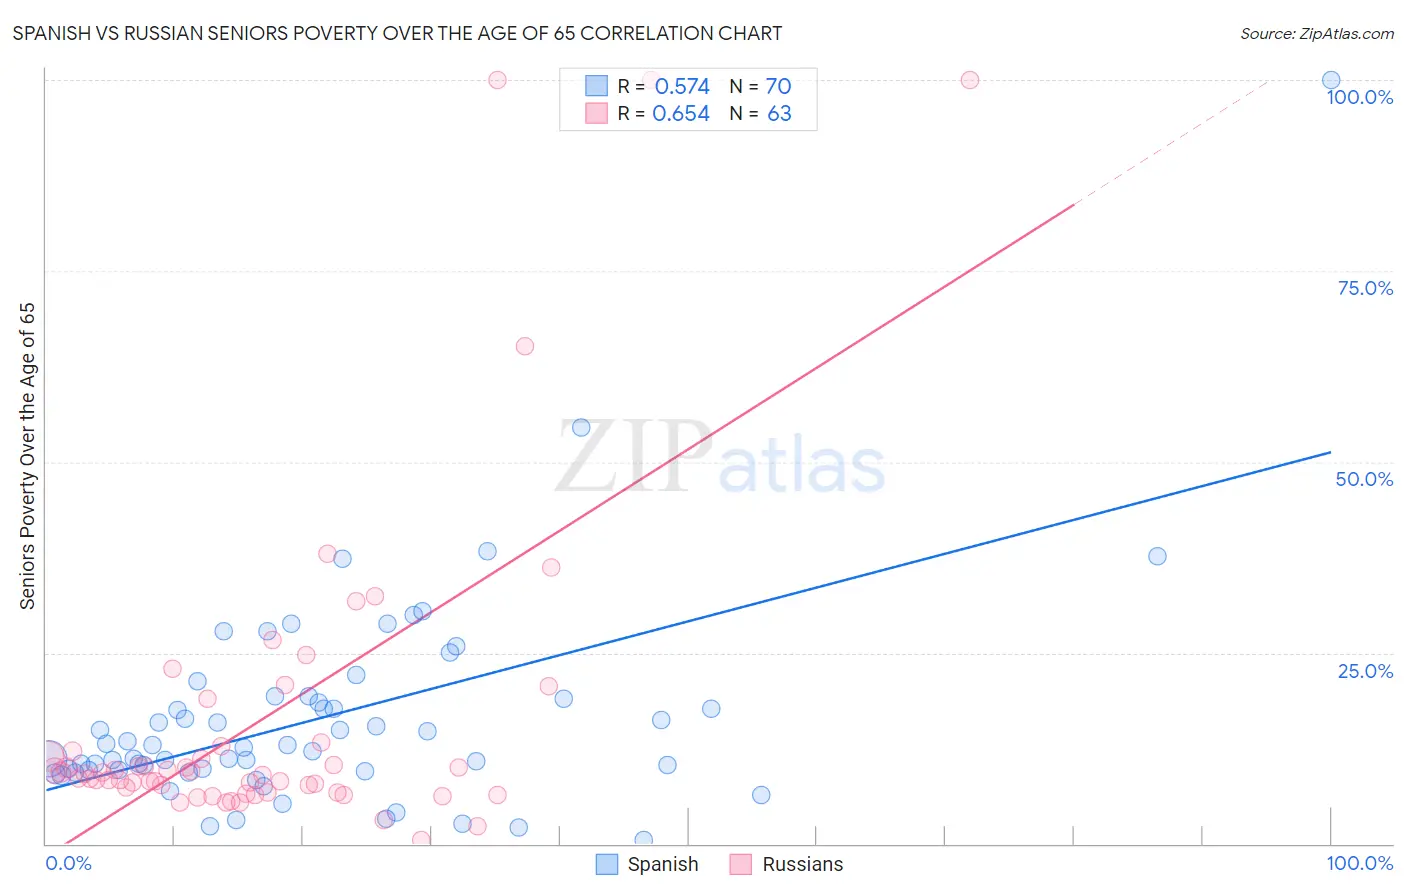 Spanish vs Russian Seniors Poverty Over the Age of 65